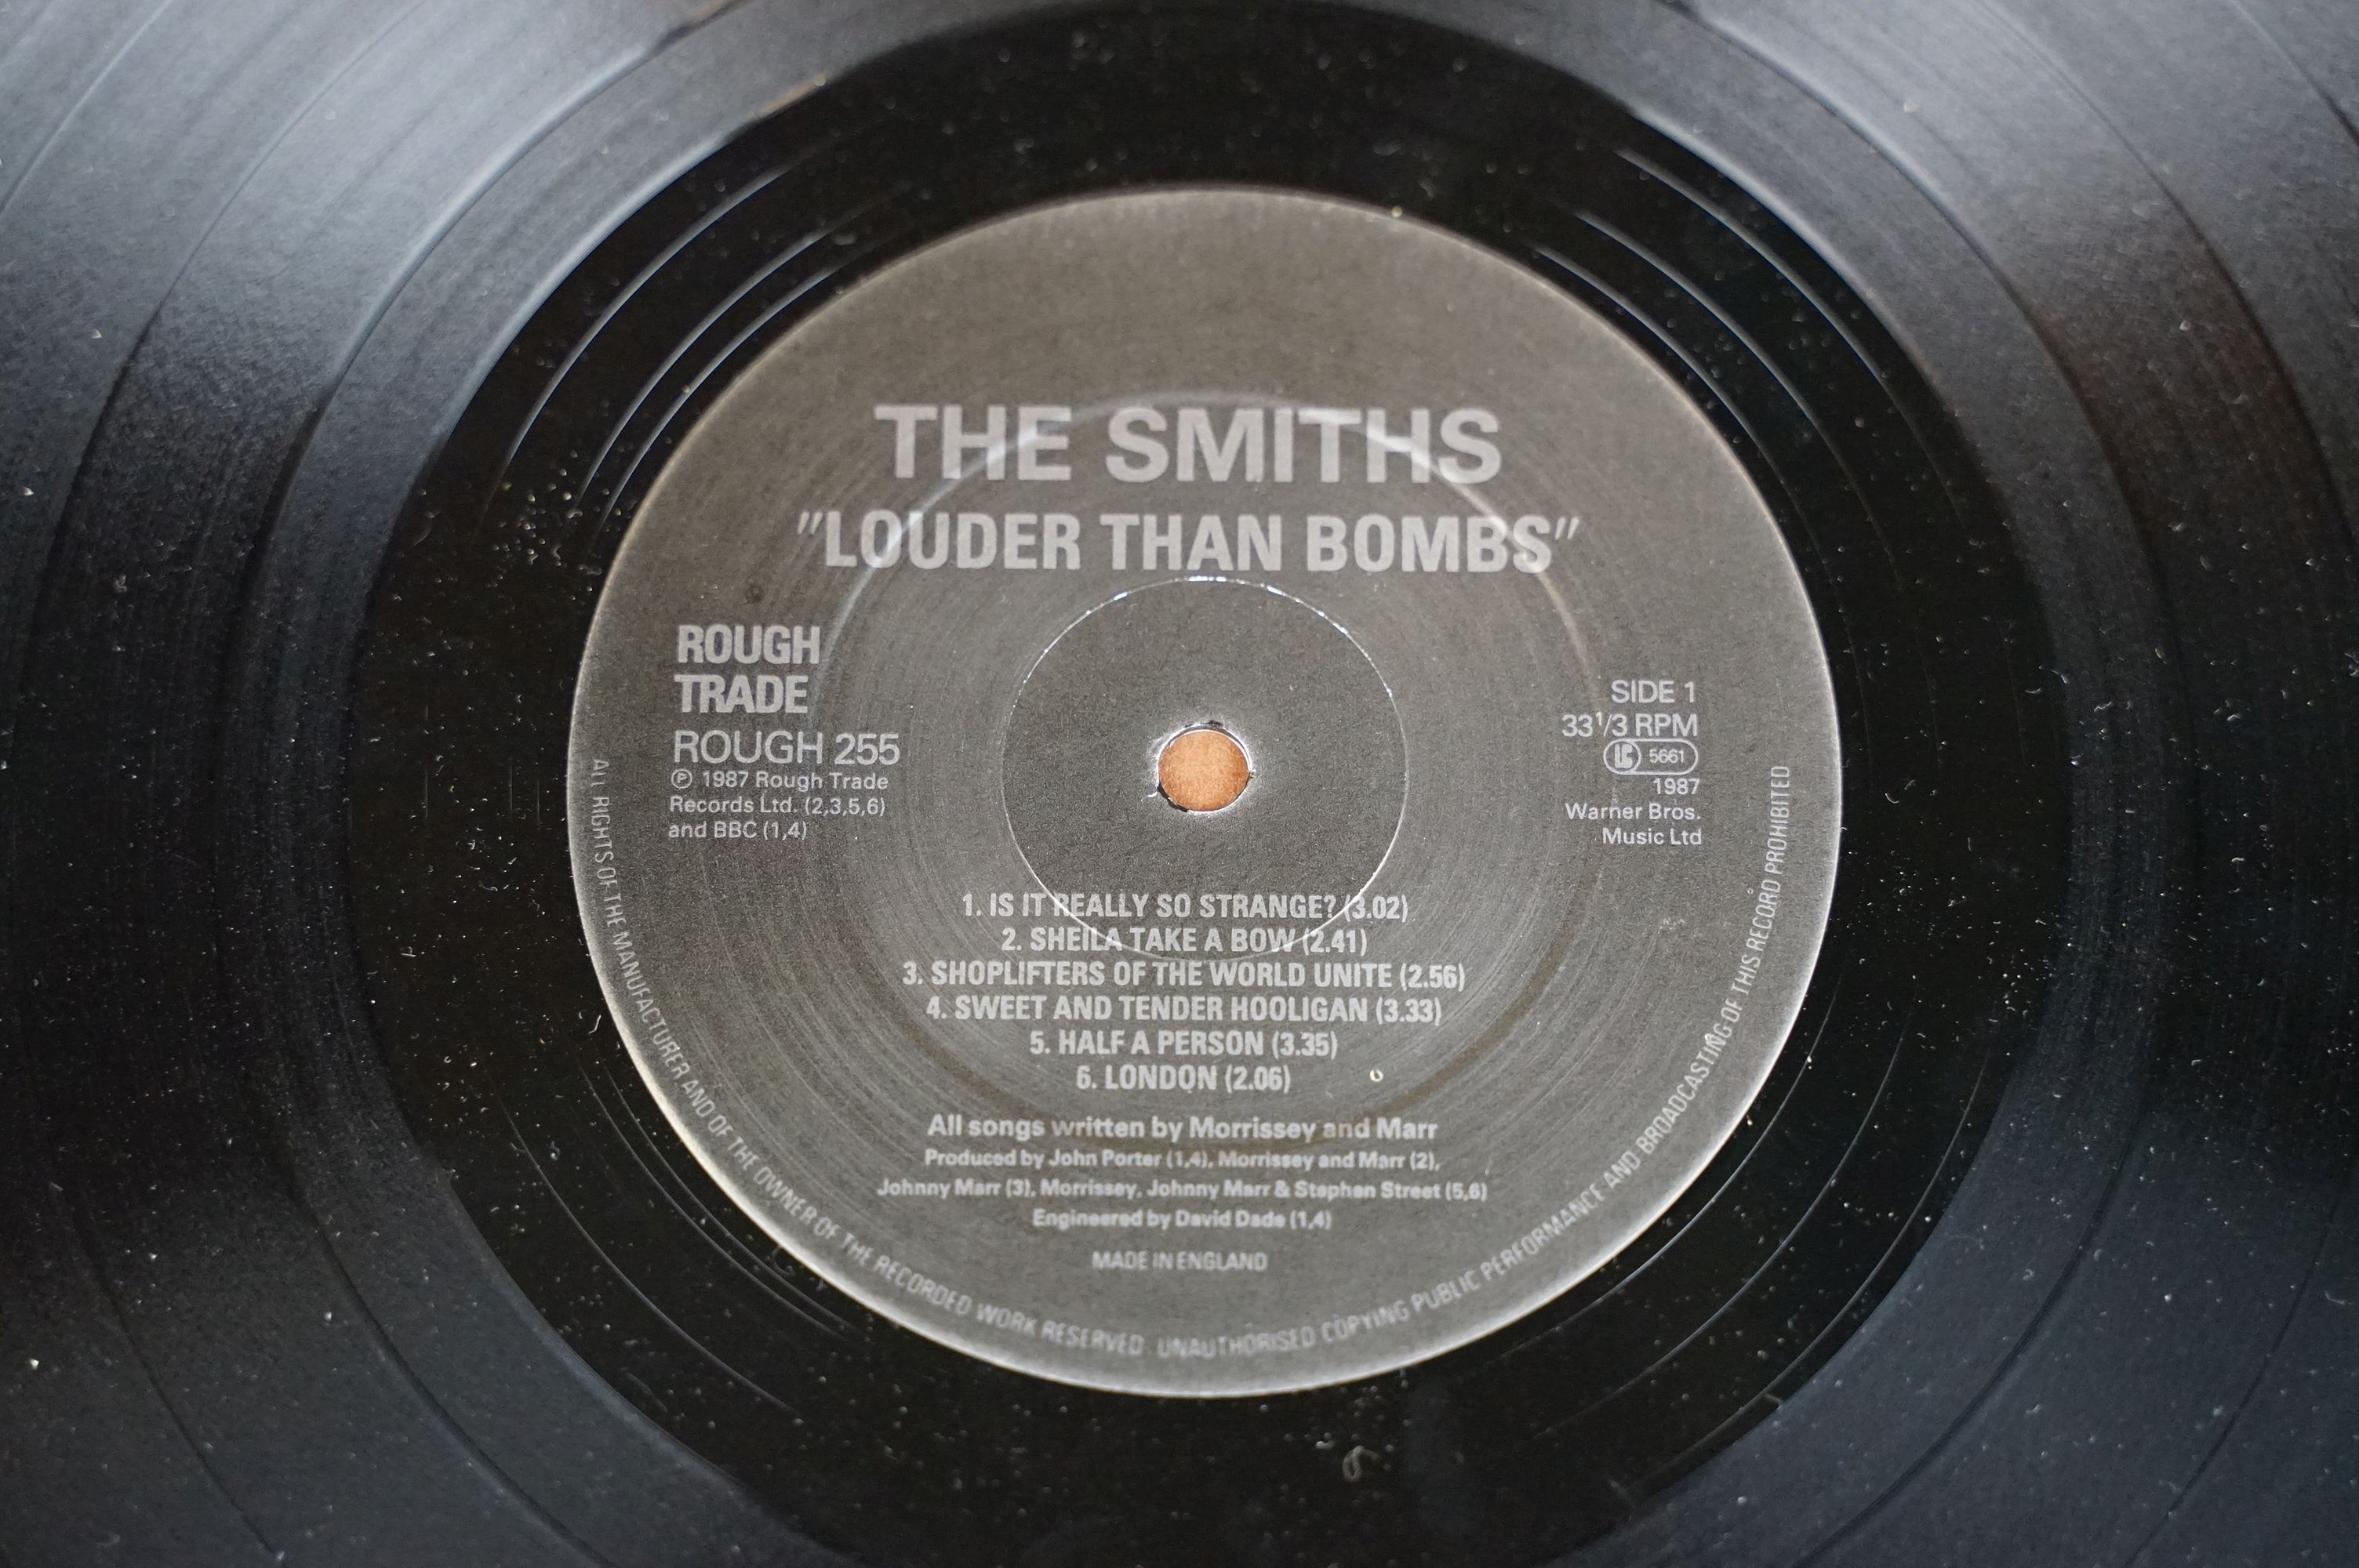 Vinyl - 3 The Smiths / Morrissey LPs to include Rank (Rough 126), Louder Than Bombs (Rough 255), - Image 11 of 17